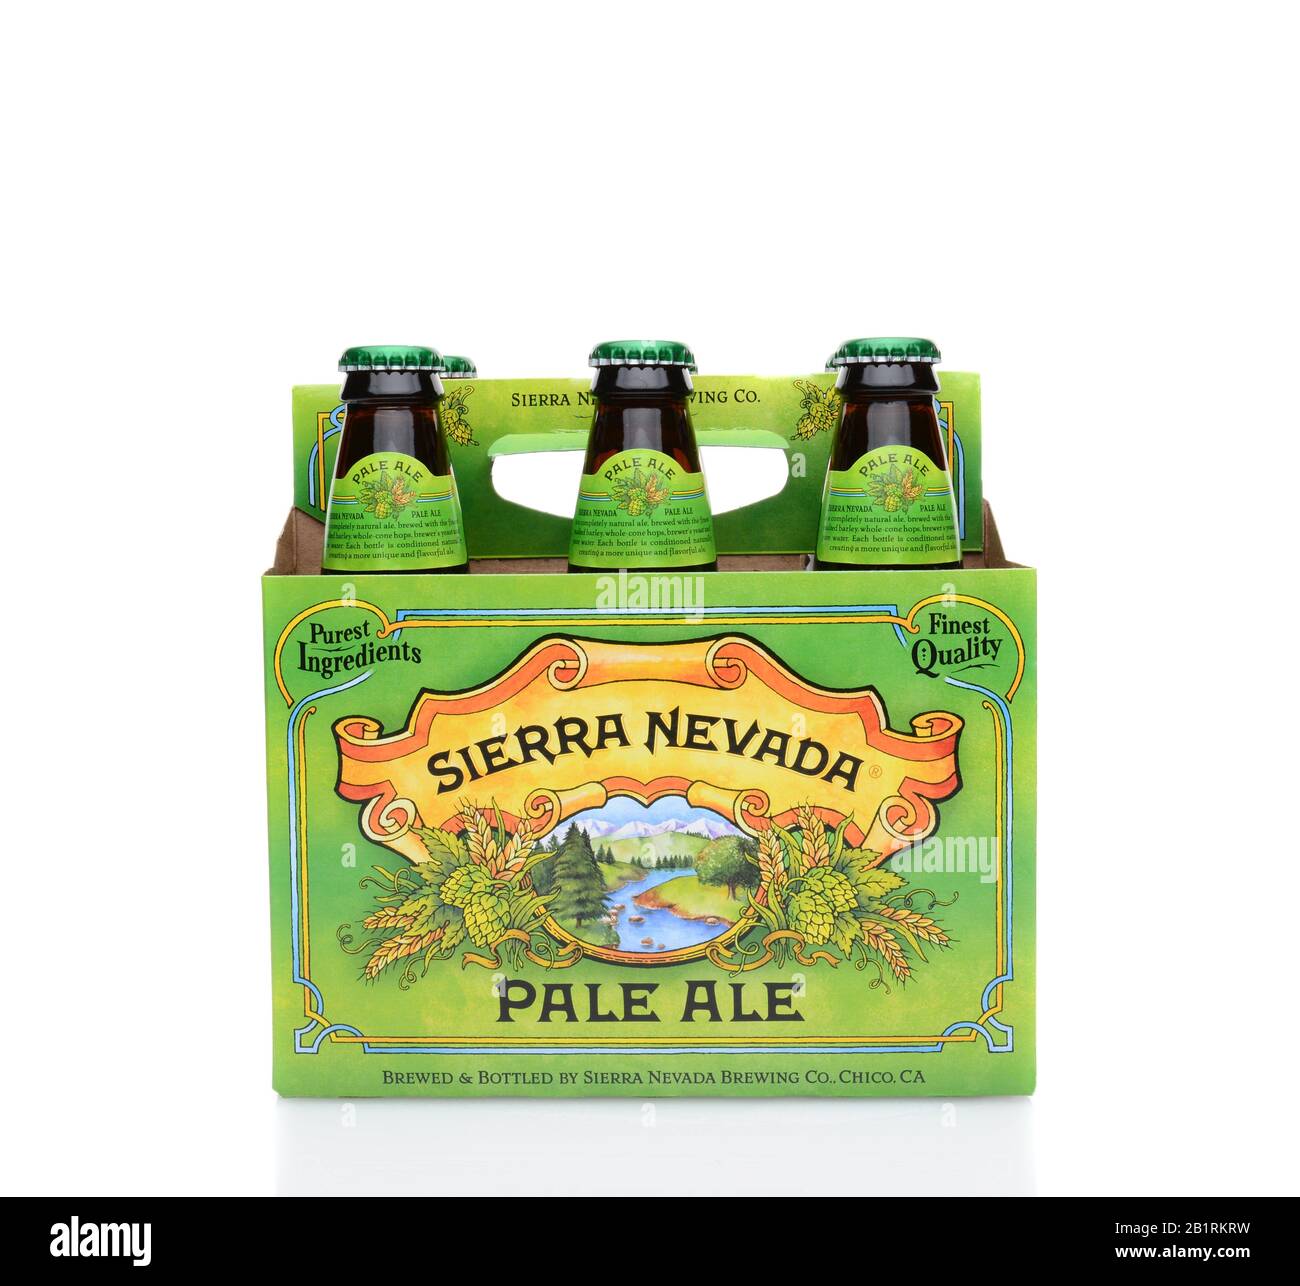 IRVINE, CA - MAY 25, 2014: A 6 pack of Sierra Nevada Pale Ale. Sierra Nevada Brewing Co. was established in 1980 by homebrewers in Chico, California, Stock Photo